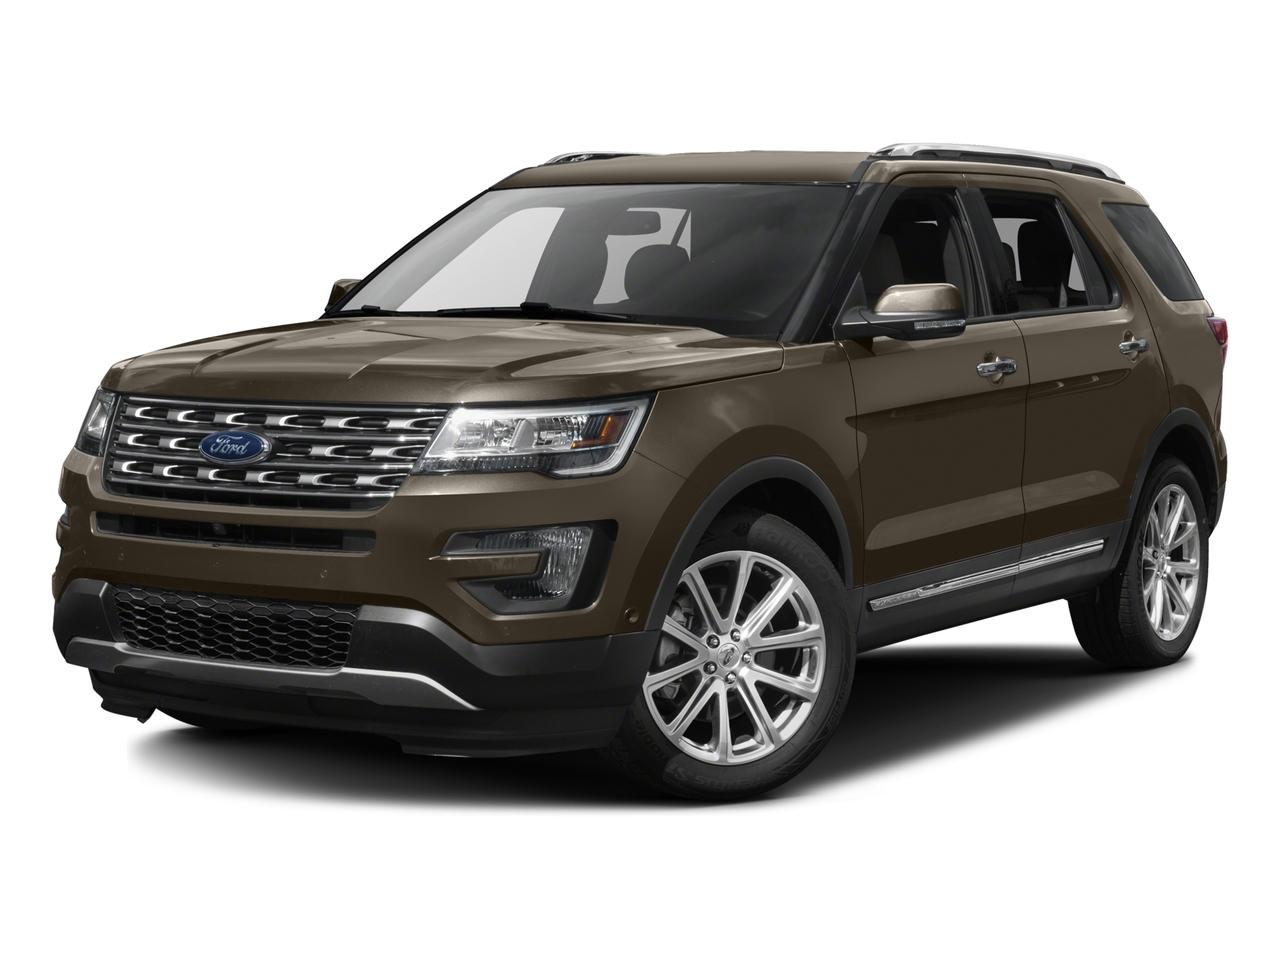 2016 Ford Explorer Vehicle Photo in Denison, TX 75020